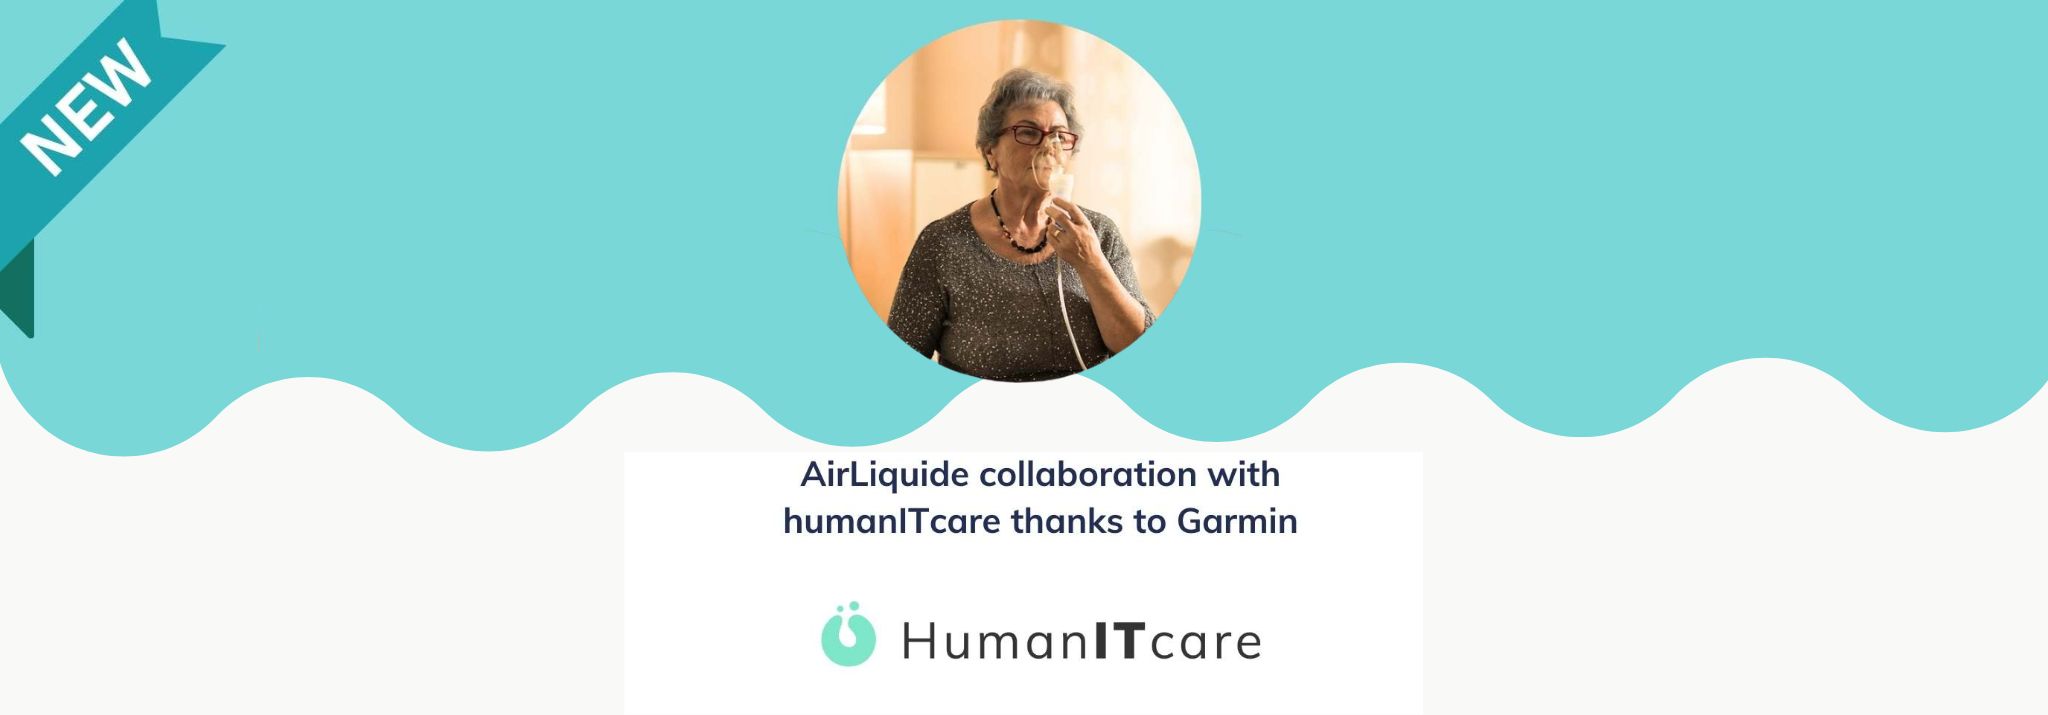 humanITcare announces new collaboration with AirLiquide & Garmin